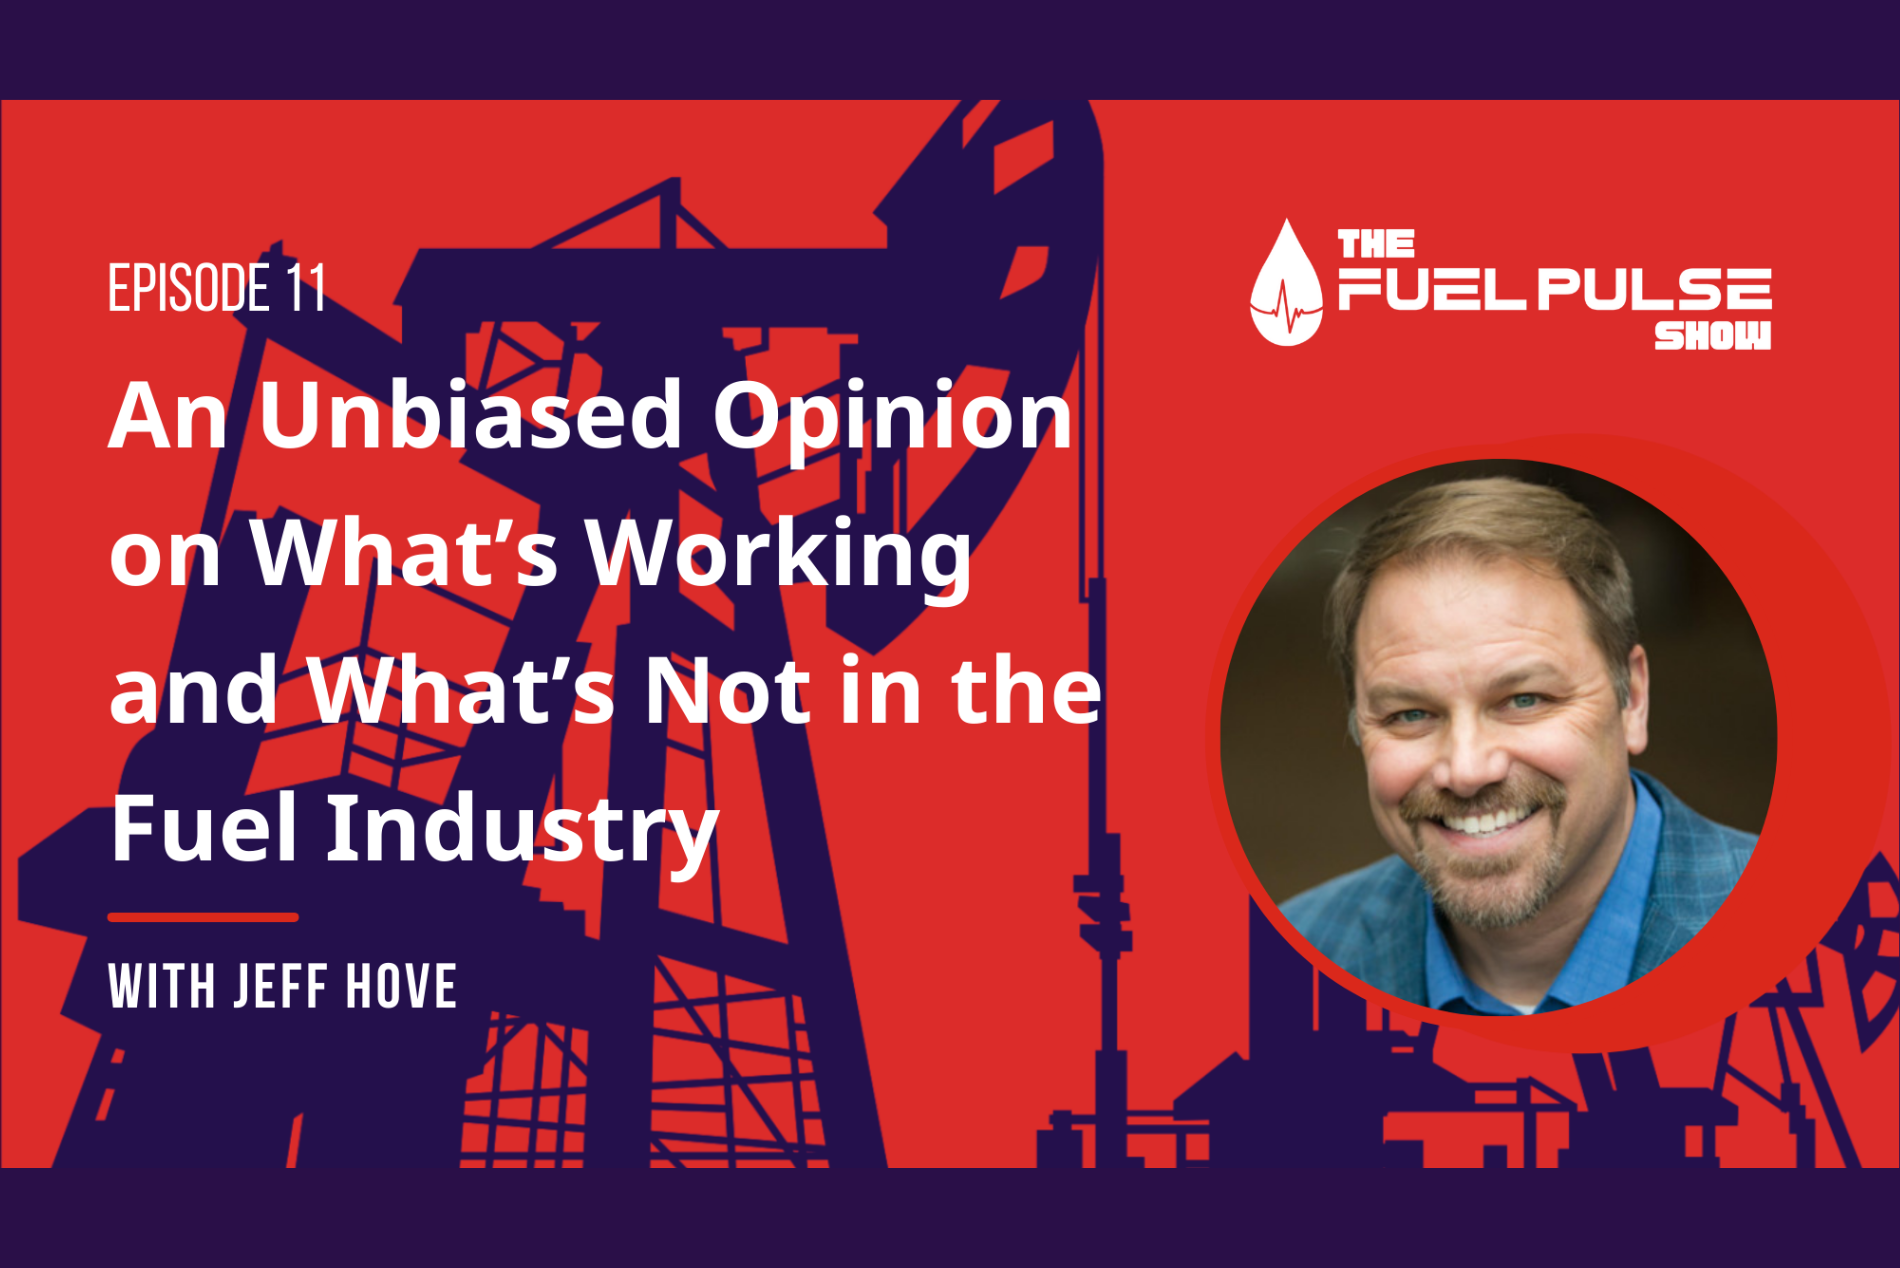 Episode 011 - An Unbiased Opinion on What’s Working and What’s Not in the Fuel Industry With Jeff Hove